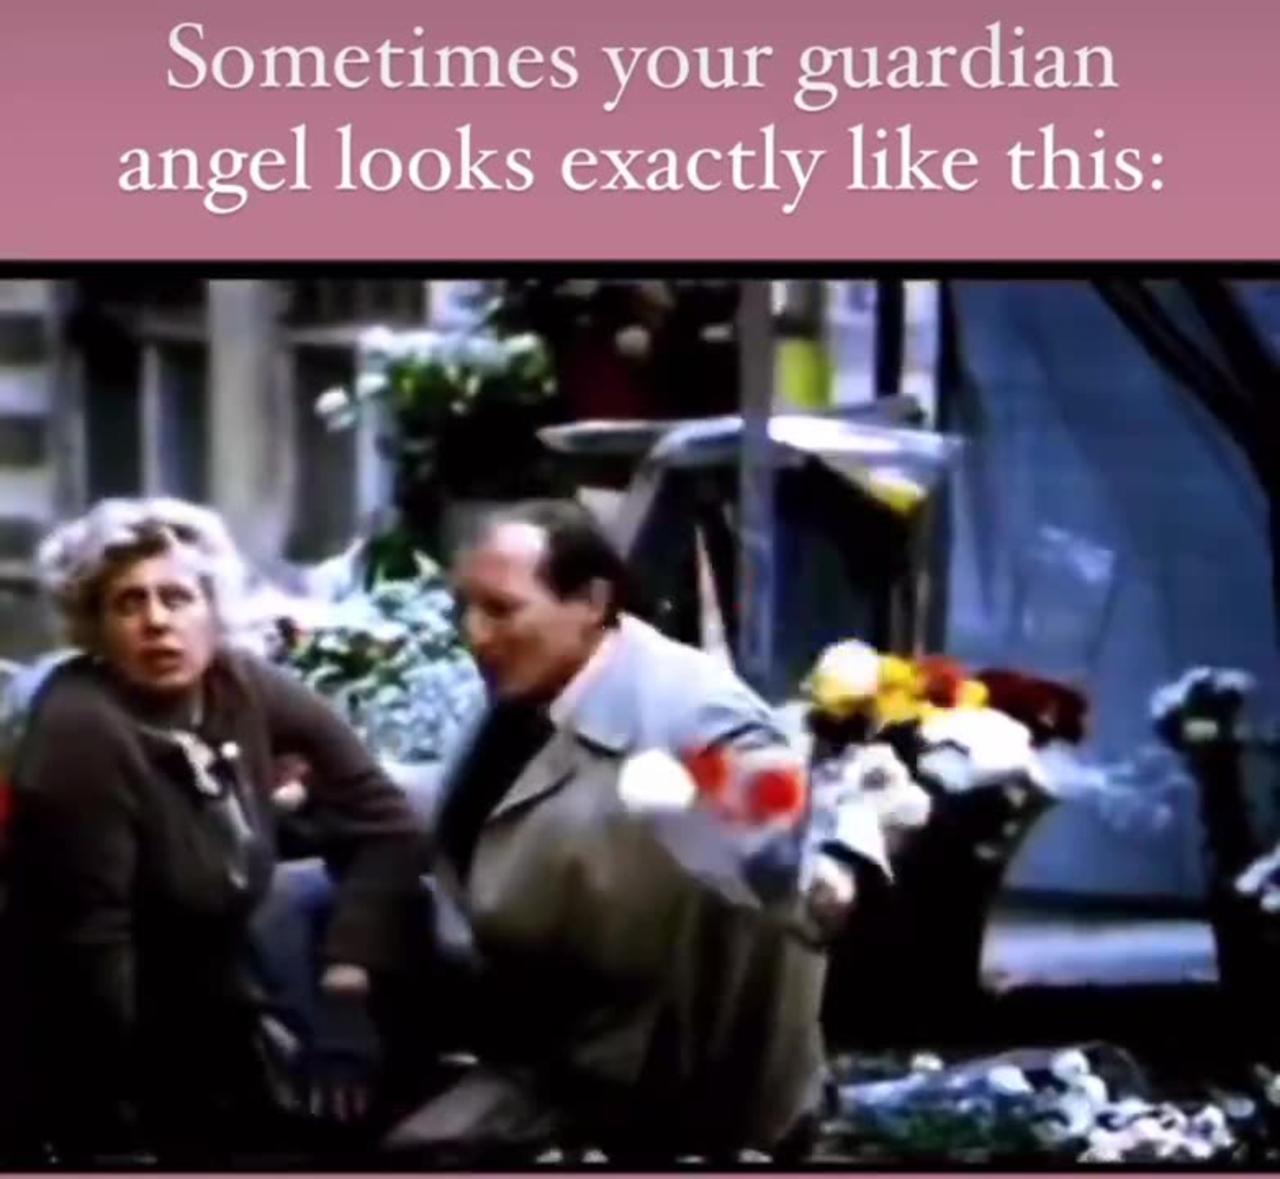 Guardian Angels can LOOK like bullies, but.....